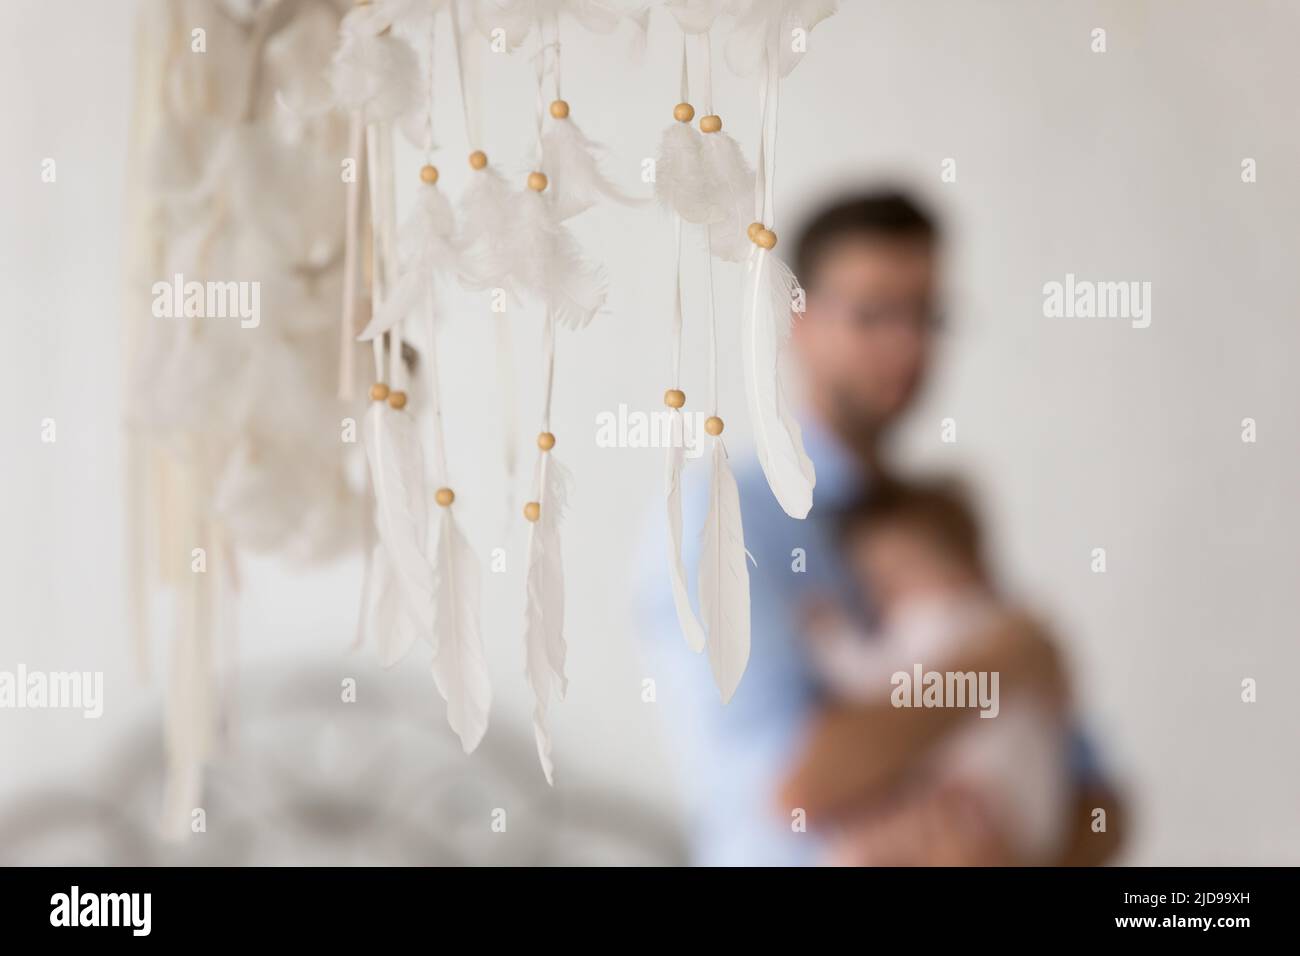 Closeup dreamcatcher, father and baby in his arms on background Stock Photo